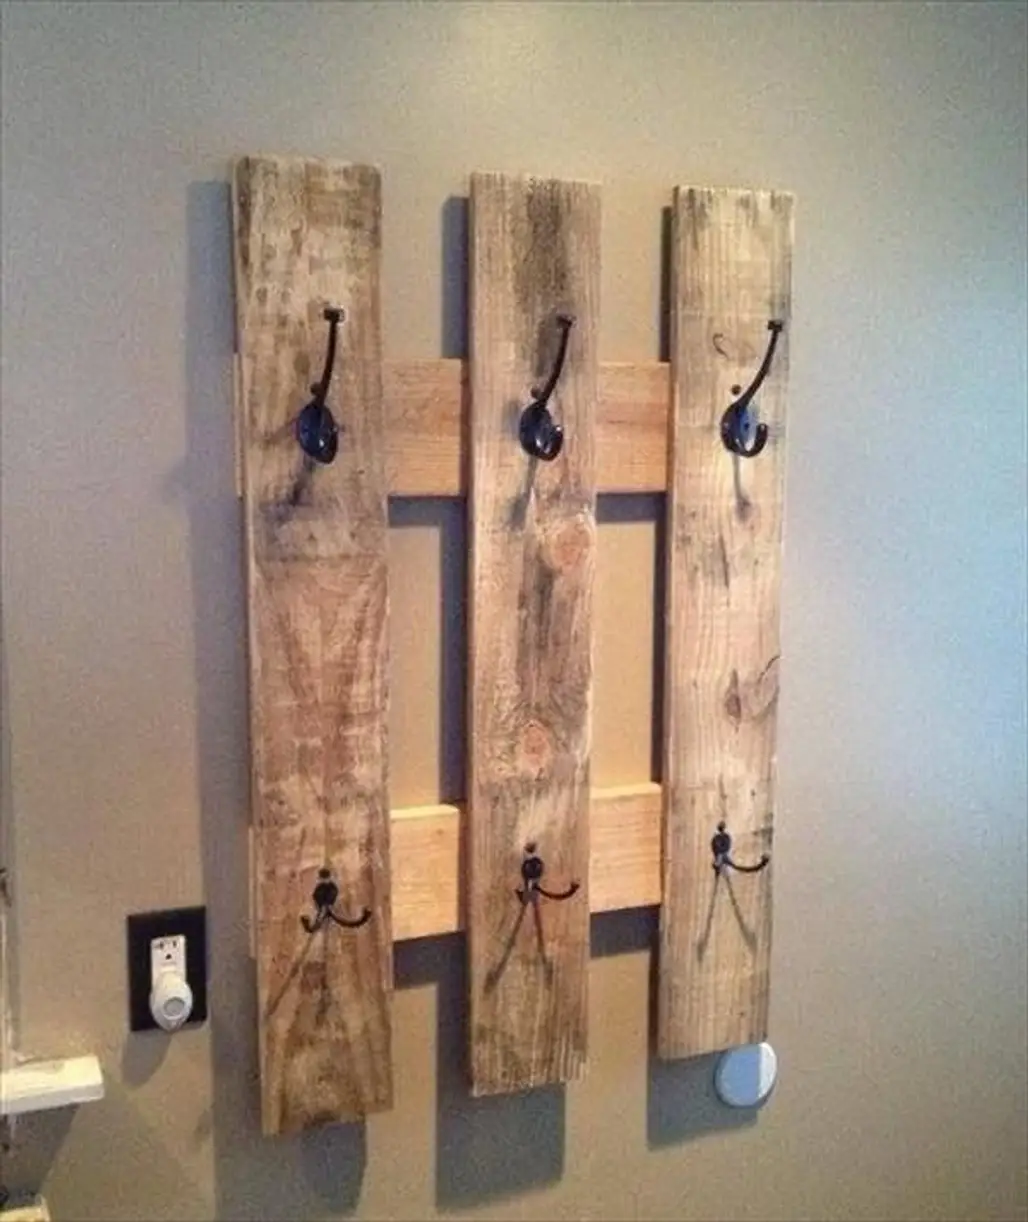 Add Some Hooks to Pallet Planks